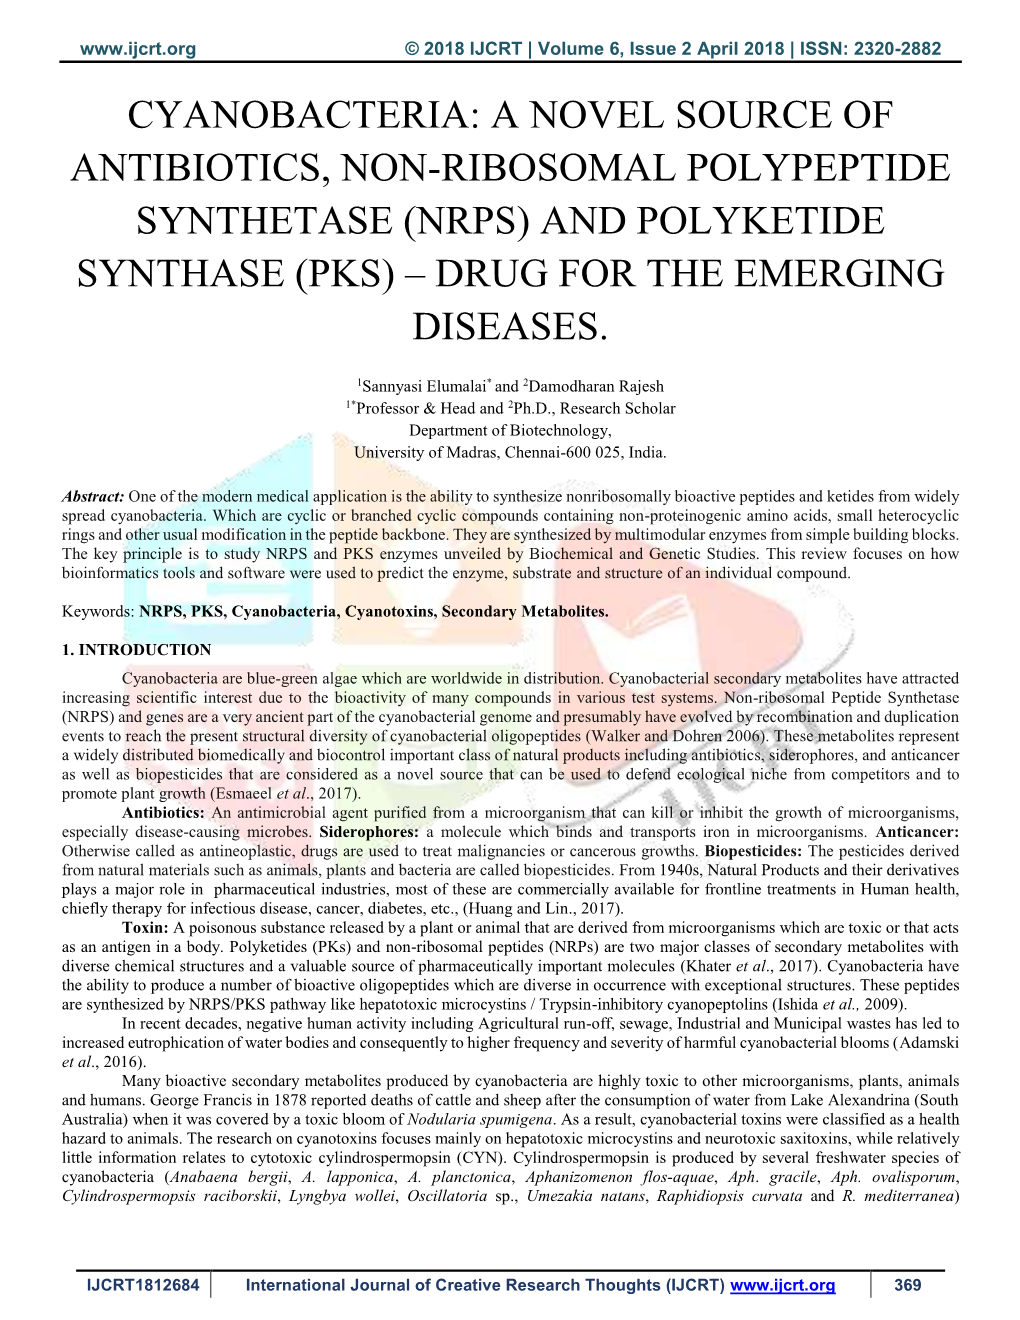 Nrps) and Polyketide Synthase (Pks) – Drug for the Emerging Diseases